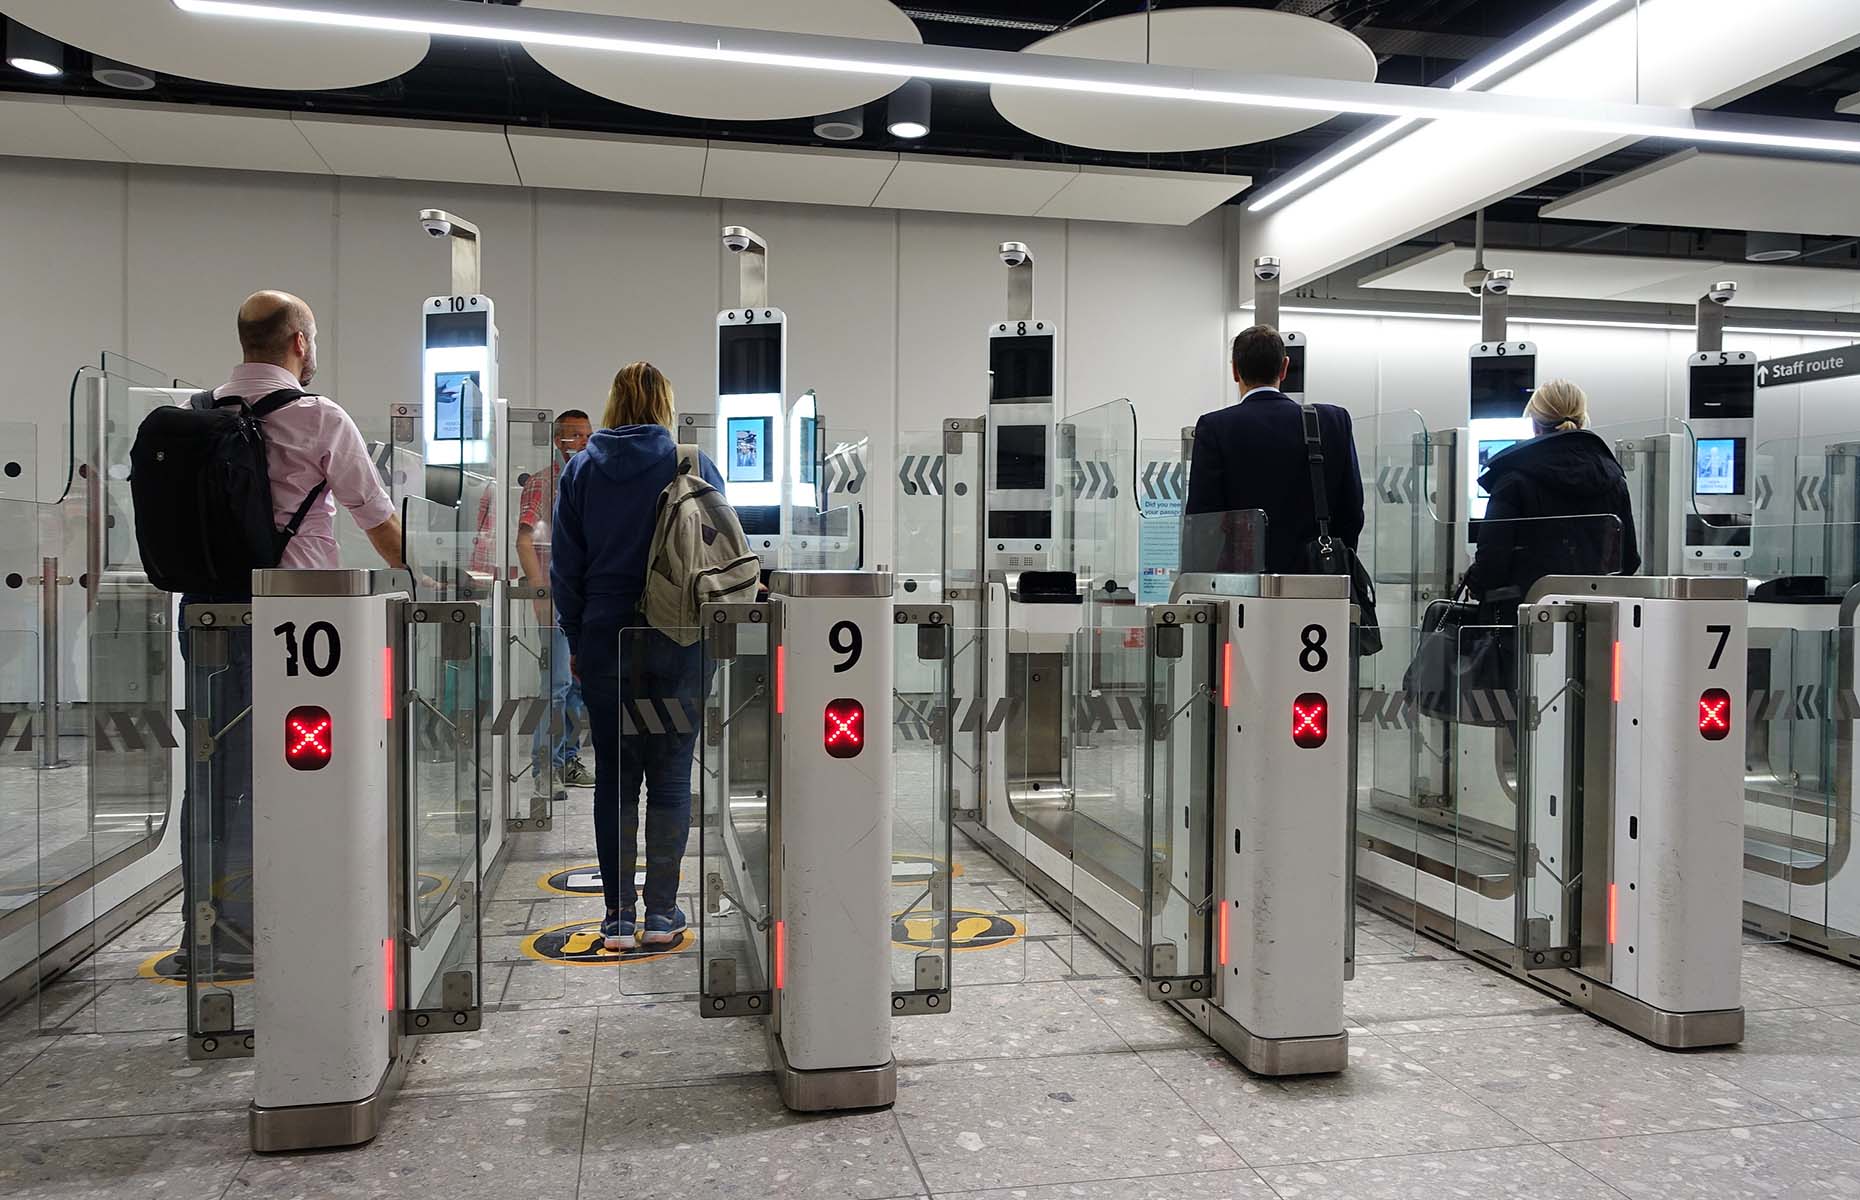 E-gates at an airport (Image: 1000 Words/Shutterstock)